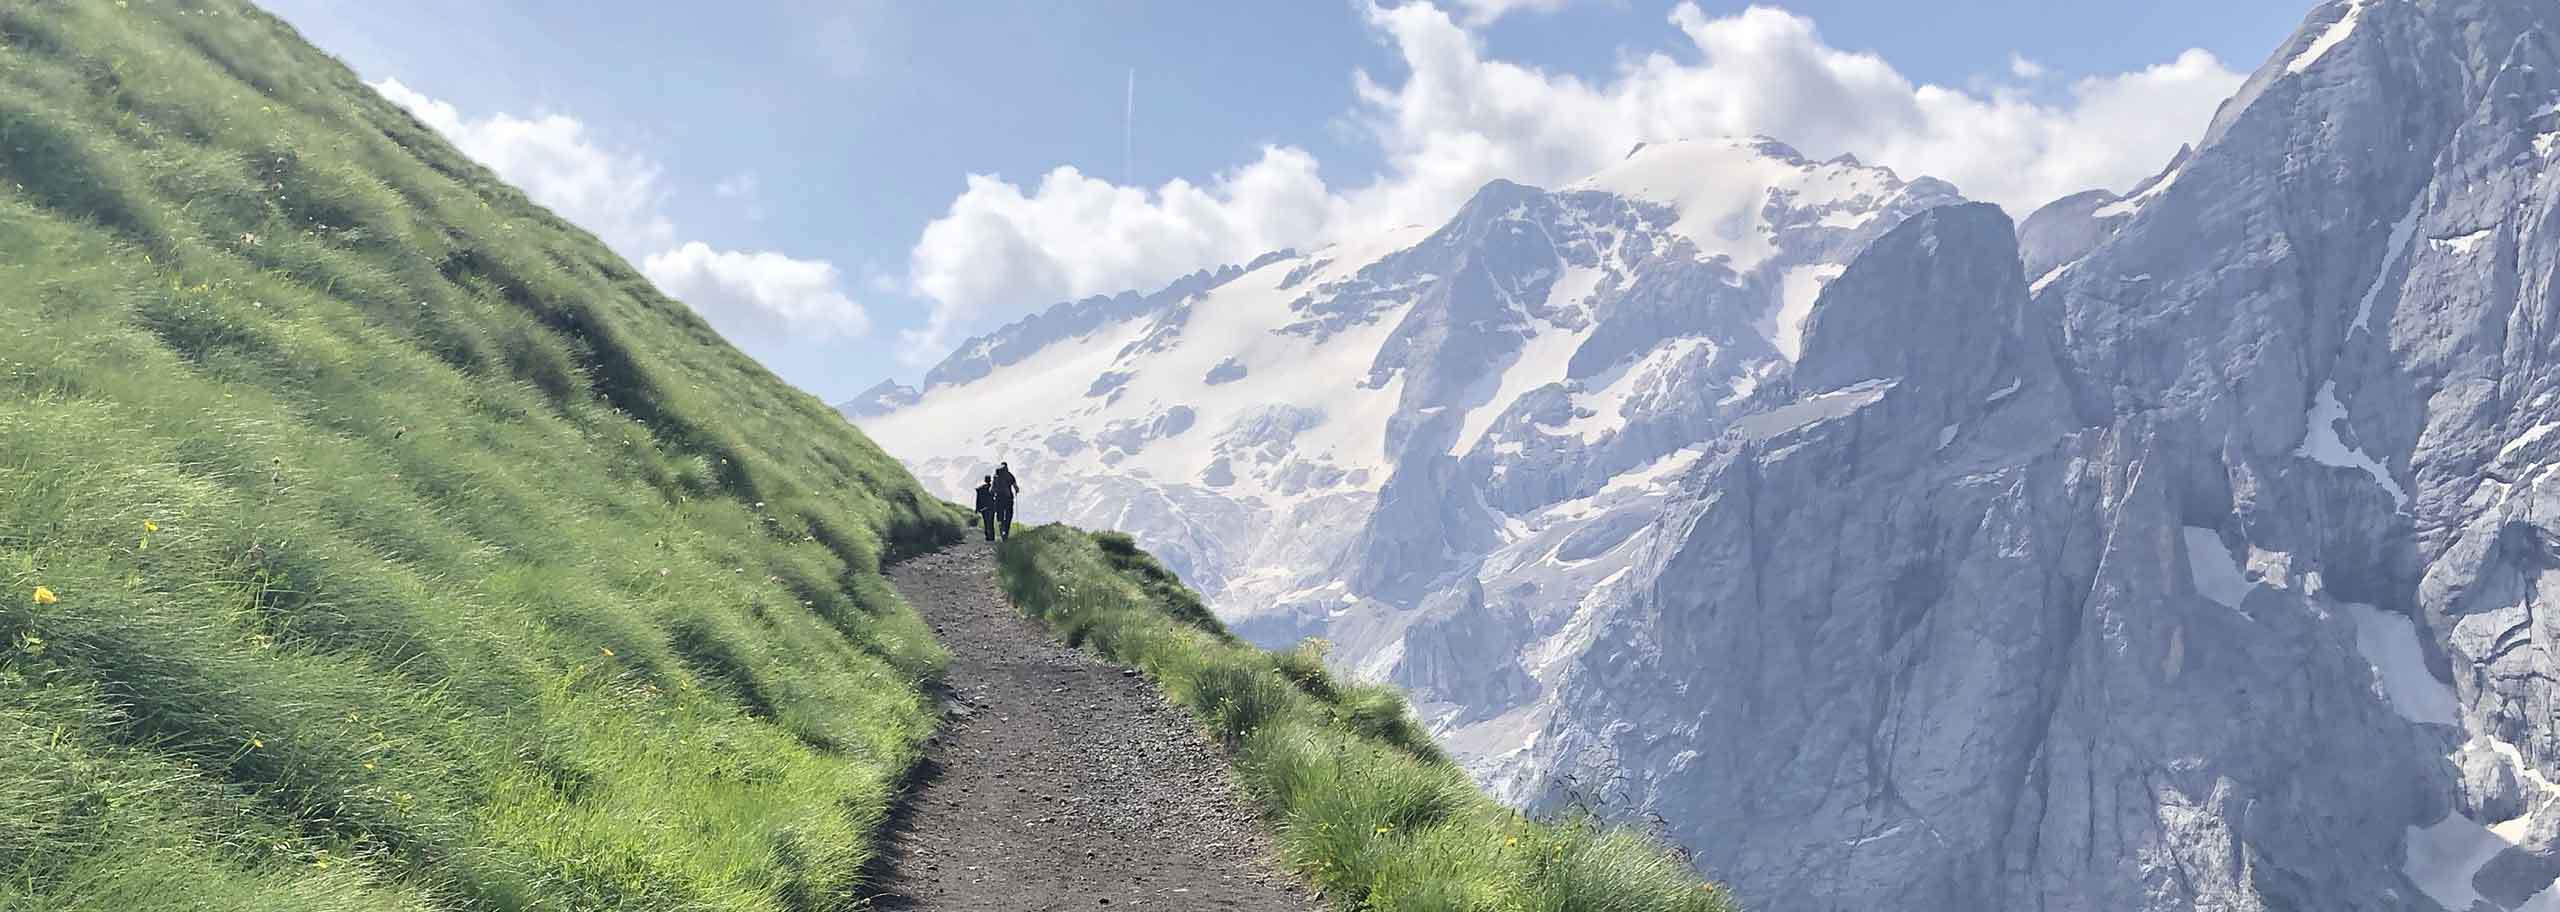 Trekking in Marmolada, Hiking with a Mountain Guide